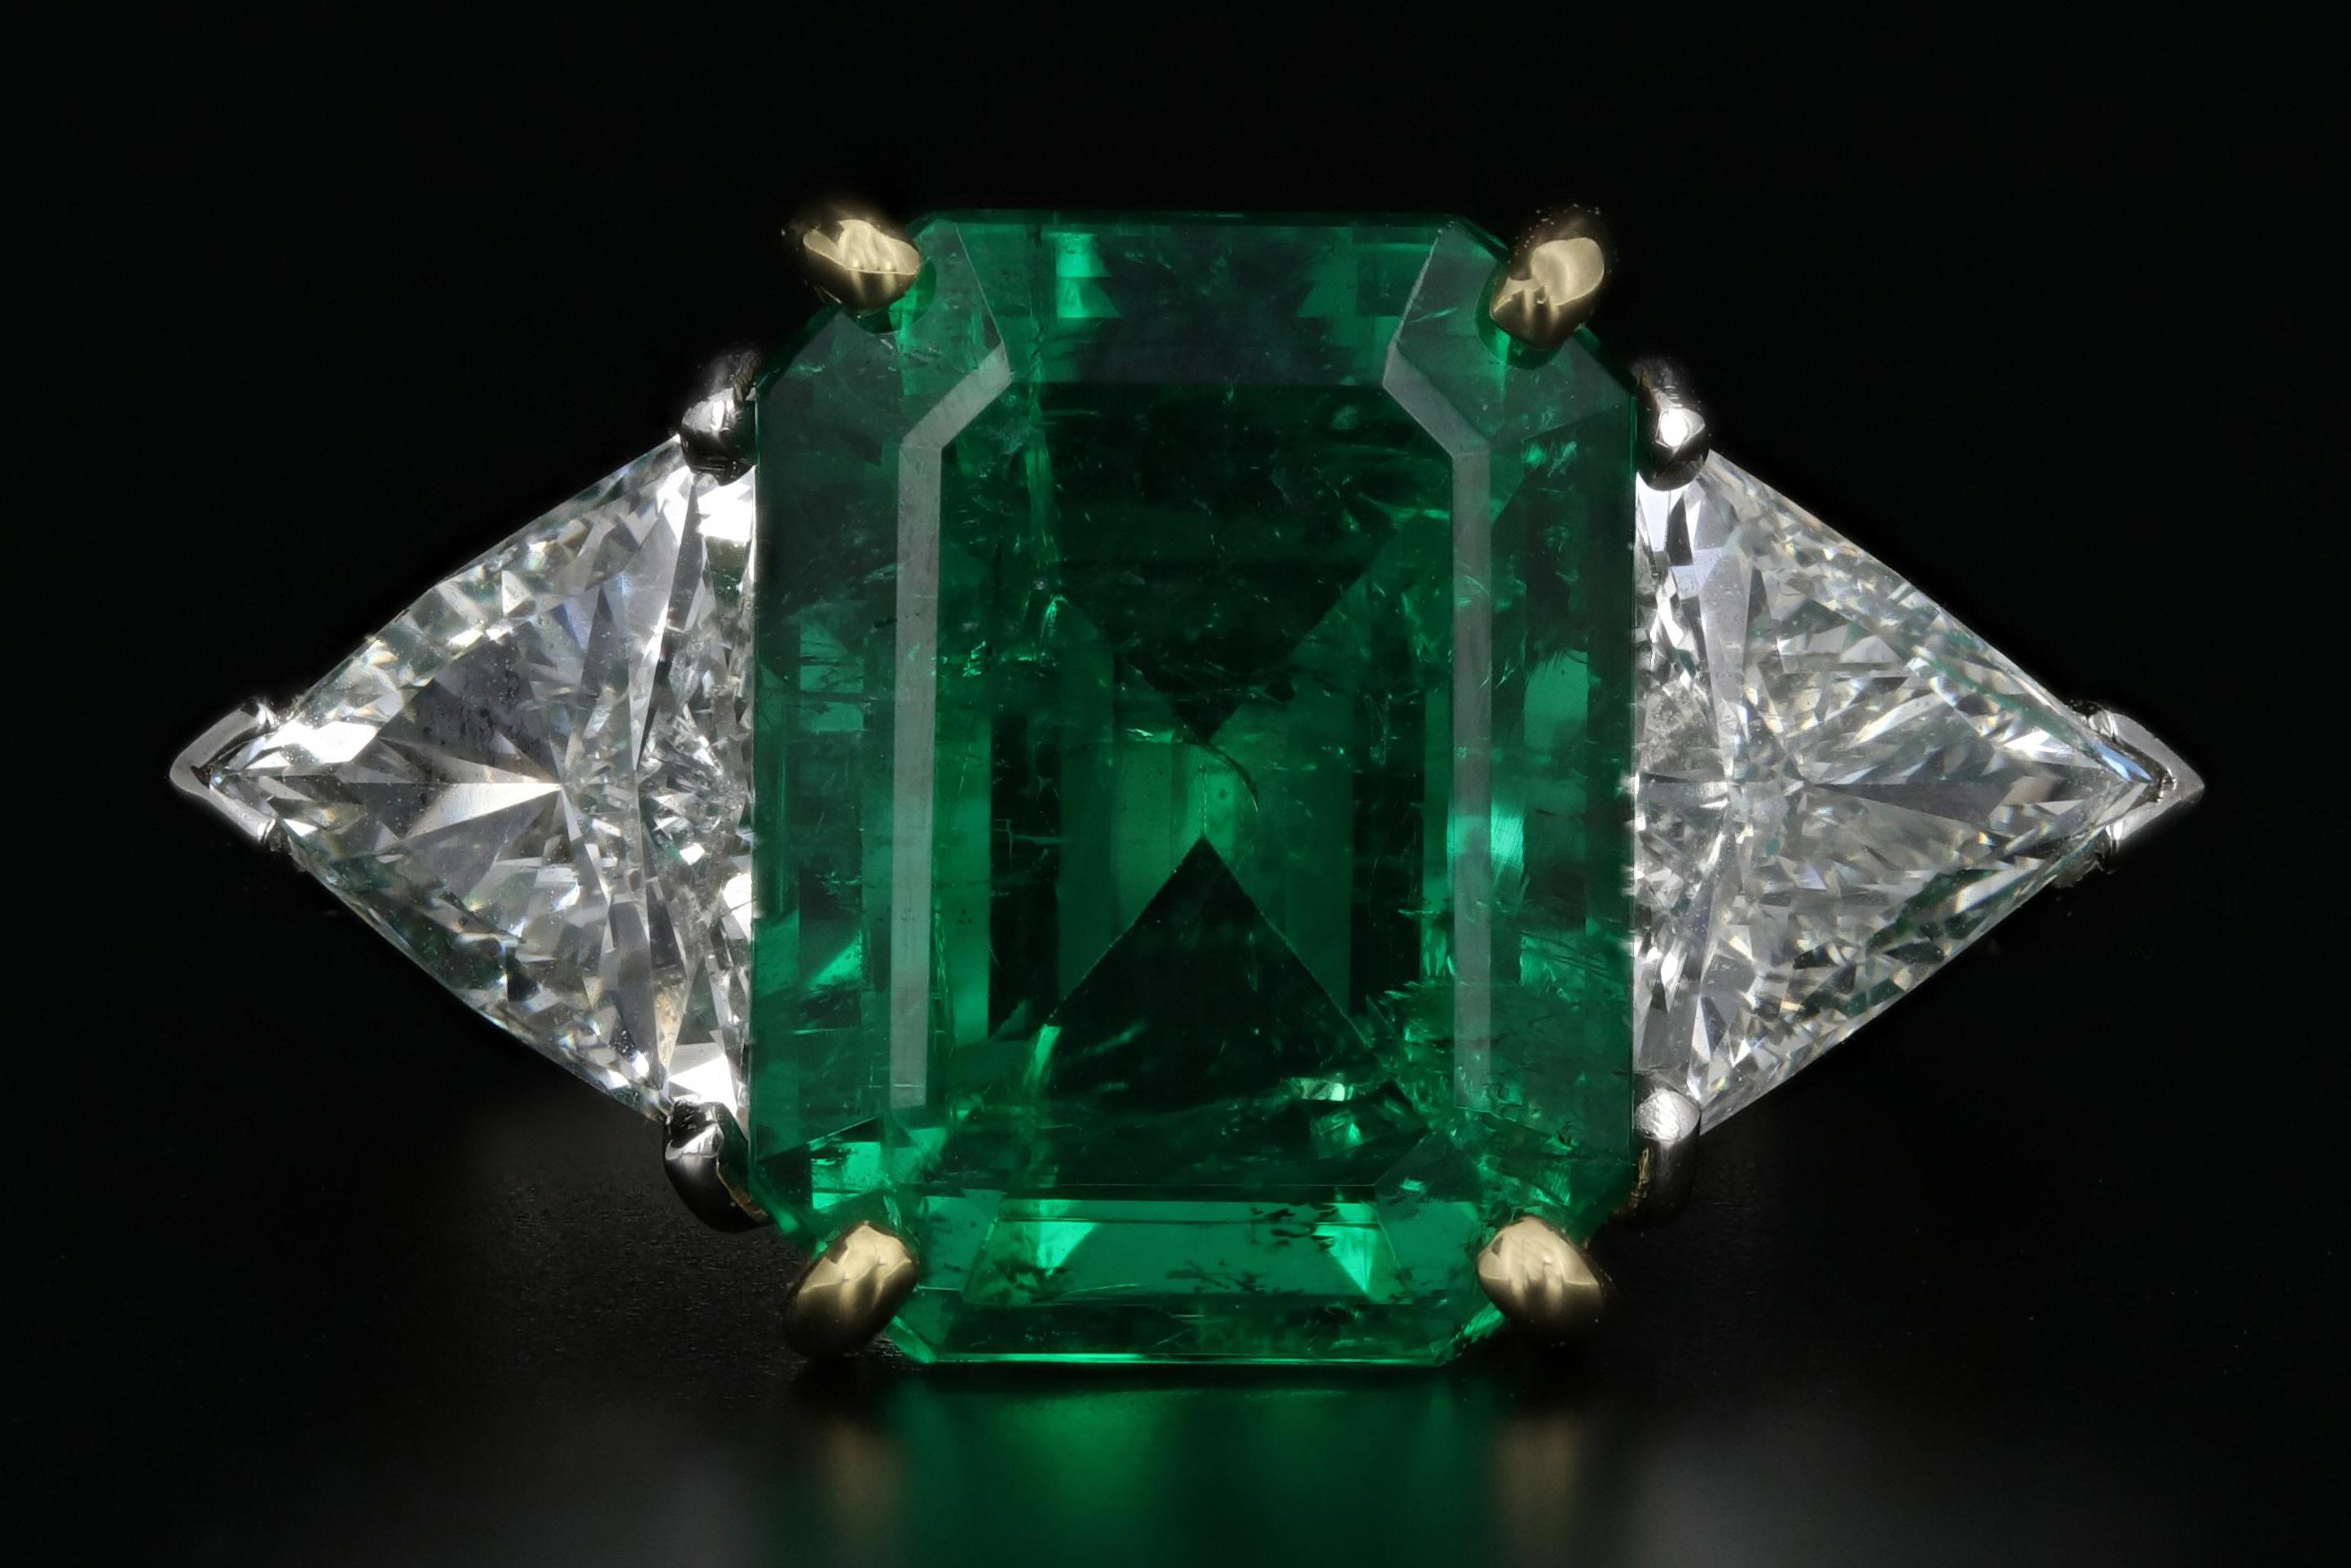 Era: Modern

Composition: 18K Yellow Gold & Platinum

Primary Stone: Natural Zambian Emerald

Carat Weight: 5.58 Carat

Clarity: Standard

Degree: Minor

Type: Traditional

Secondary Stone: Diamond

Carat Weight: 1 Carat Each ( 2 CTW)

Color: